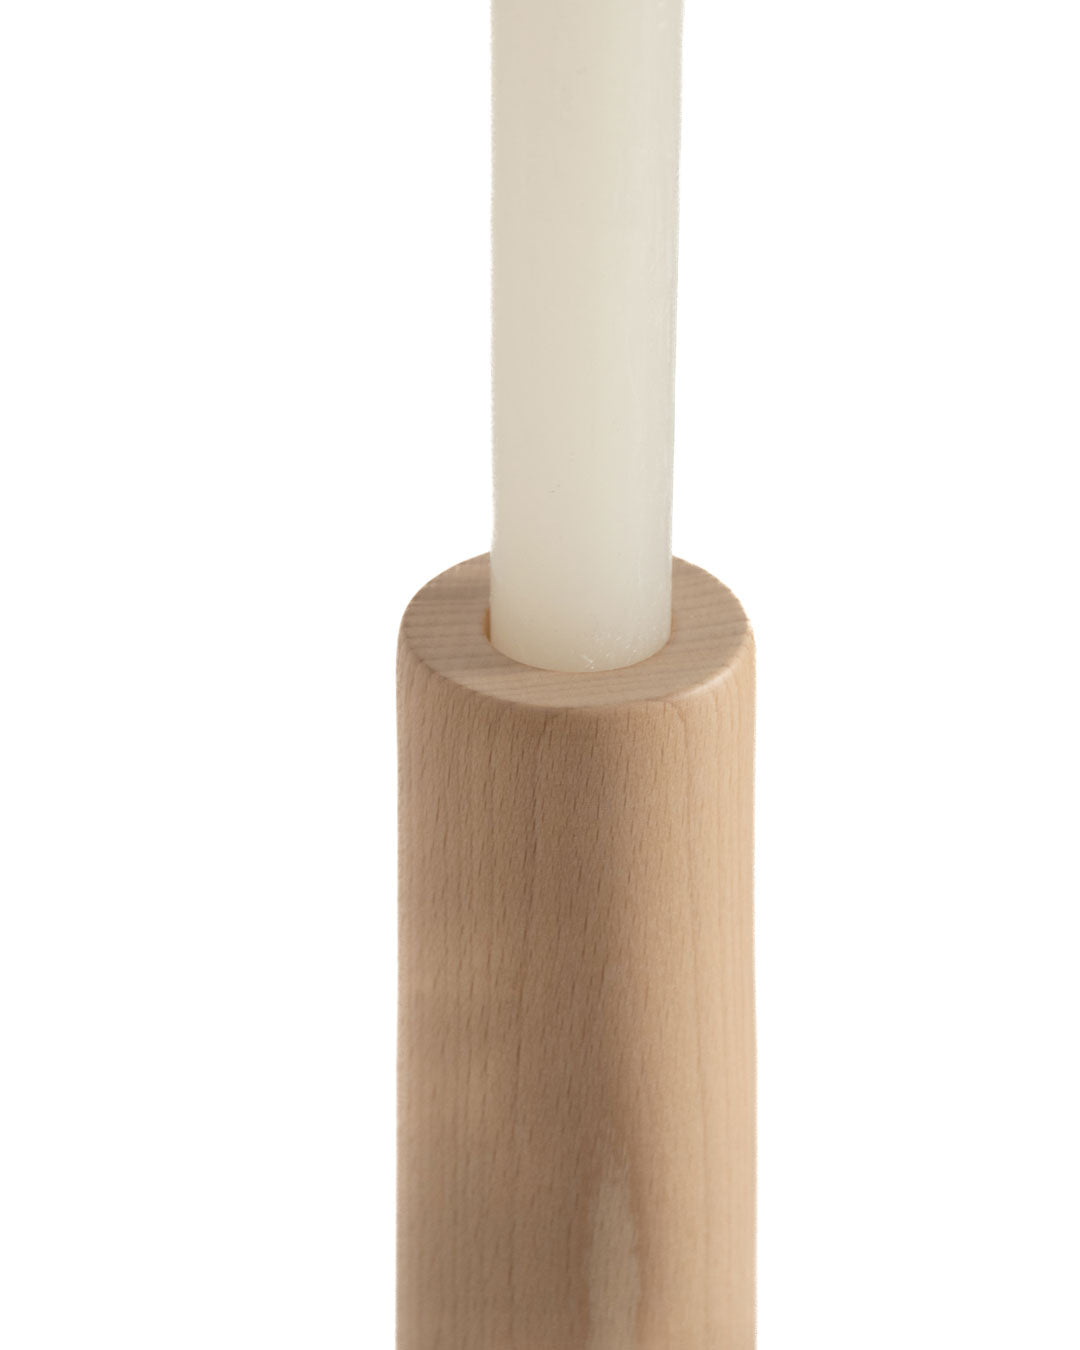 Candleholder-Cone-high candle support